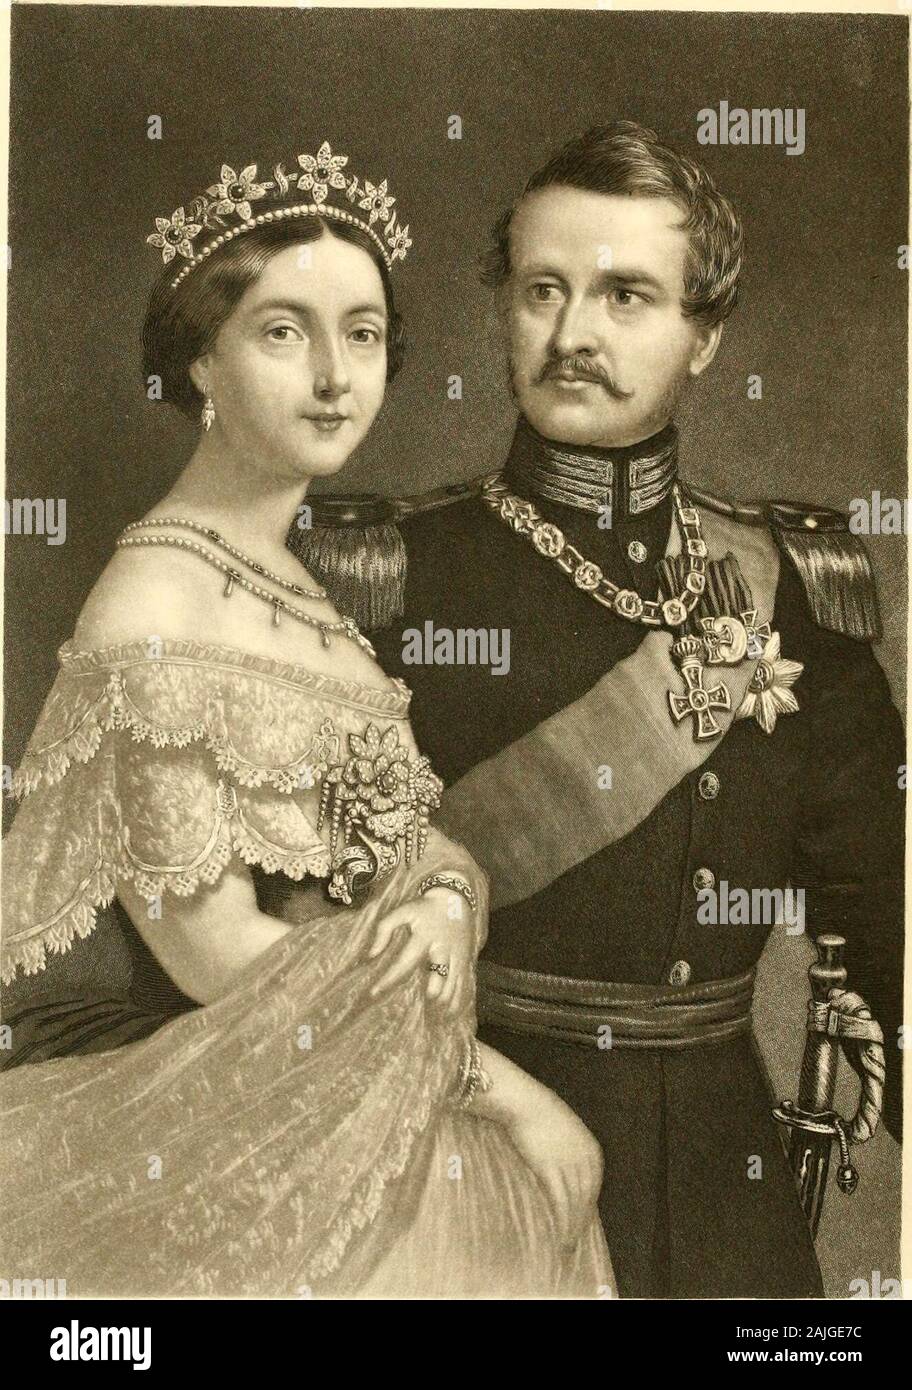 Imperial courts of France, England, Russia, Prussia, Sardinia, and Austria . g Frederic William, was,before her marriage, the Princess Marie Louise AugusteCatherine. She is the daughter of Charles Frederic, lateGrand Duke of Saxe-Weimar Eisenach, and sister of thereigning Grand Duke. She was born September 30, 1811,and married June 11, 1829. She is the mother of PrinceFrederic William of Prussia, who is married to the eldestdaughter of Queen Victoria of England. She is the motheralso of the Princess Louise Marie Elizabeth, who is marriedto the reigning Grand Duke of Baden. She Avas crownedat K Stock Photo